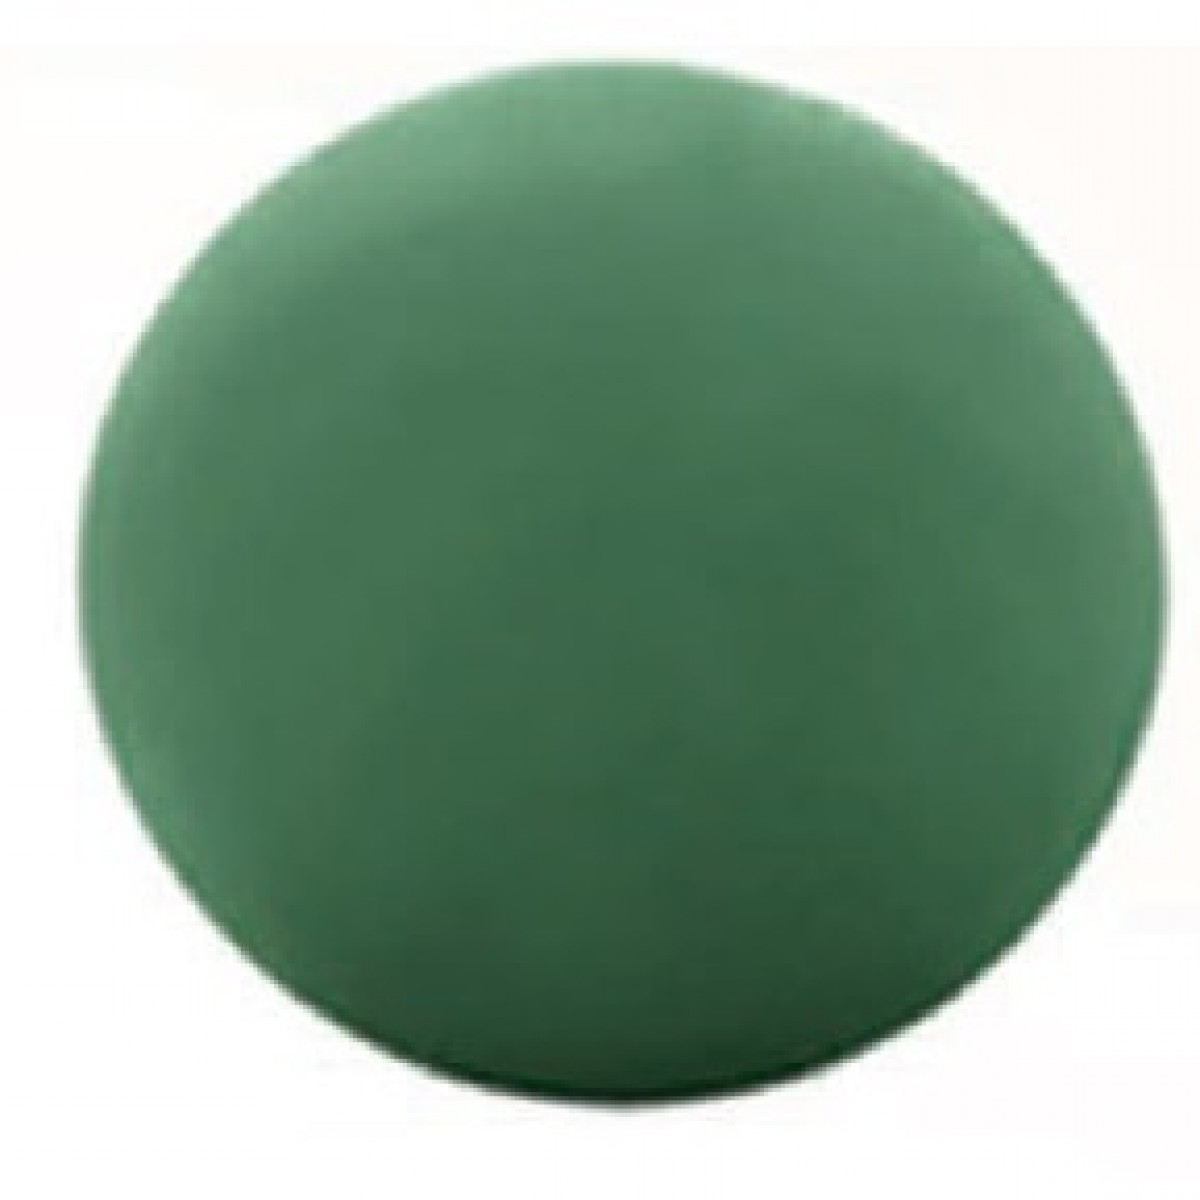 300mm (1 No) Oasis Floral Foam Spheres without Net